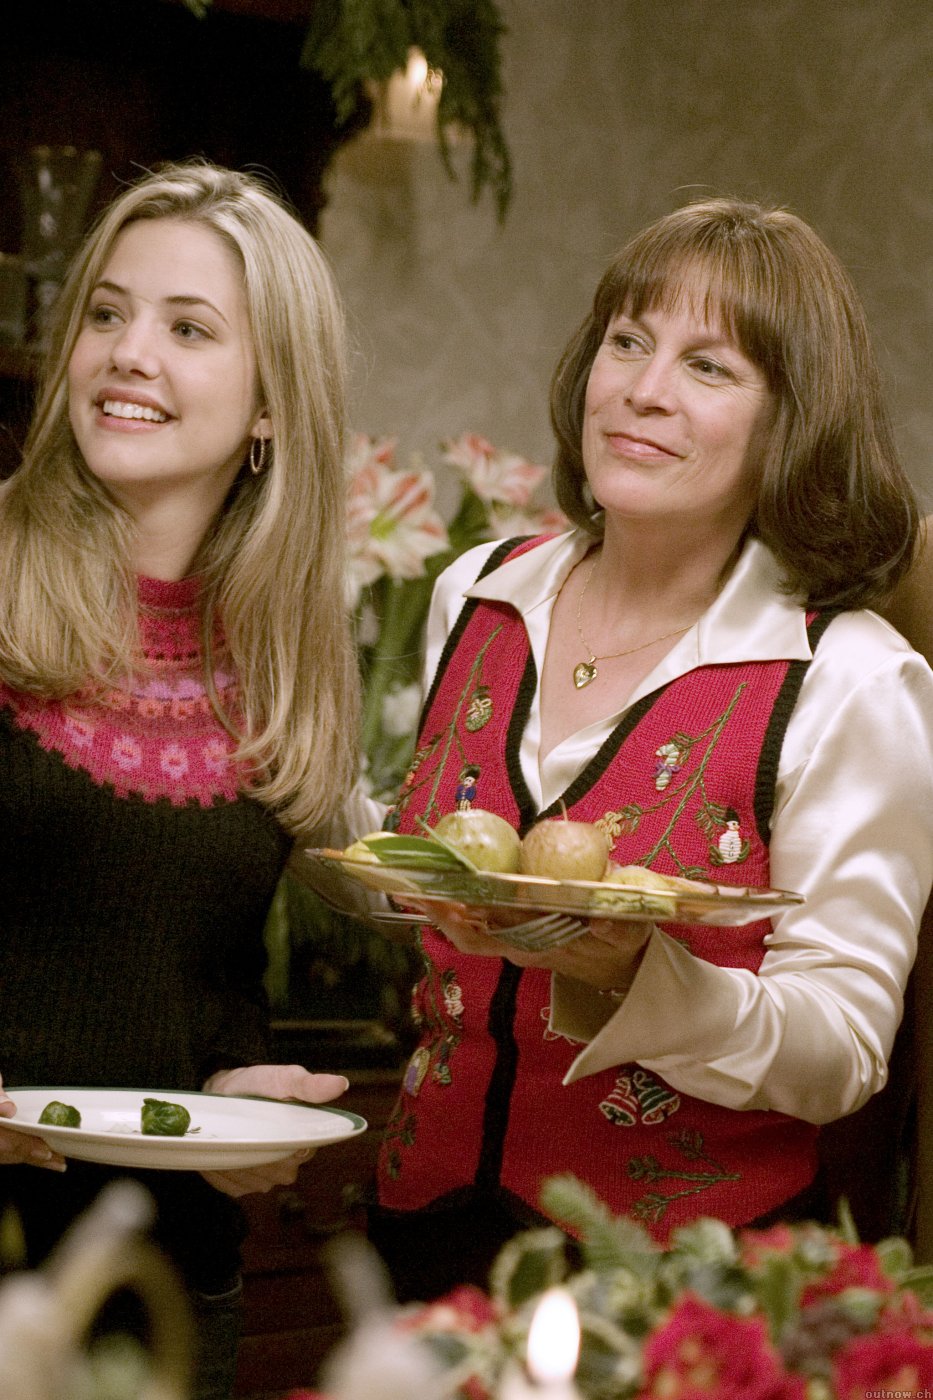 Julie Gonzalo in Christmas with the Kranks